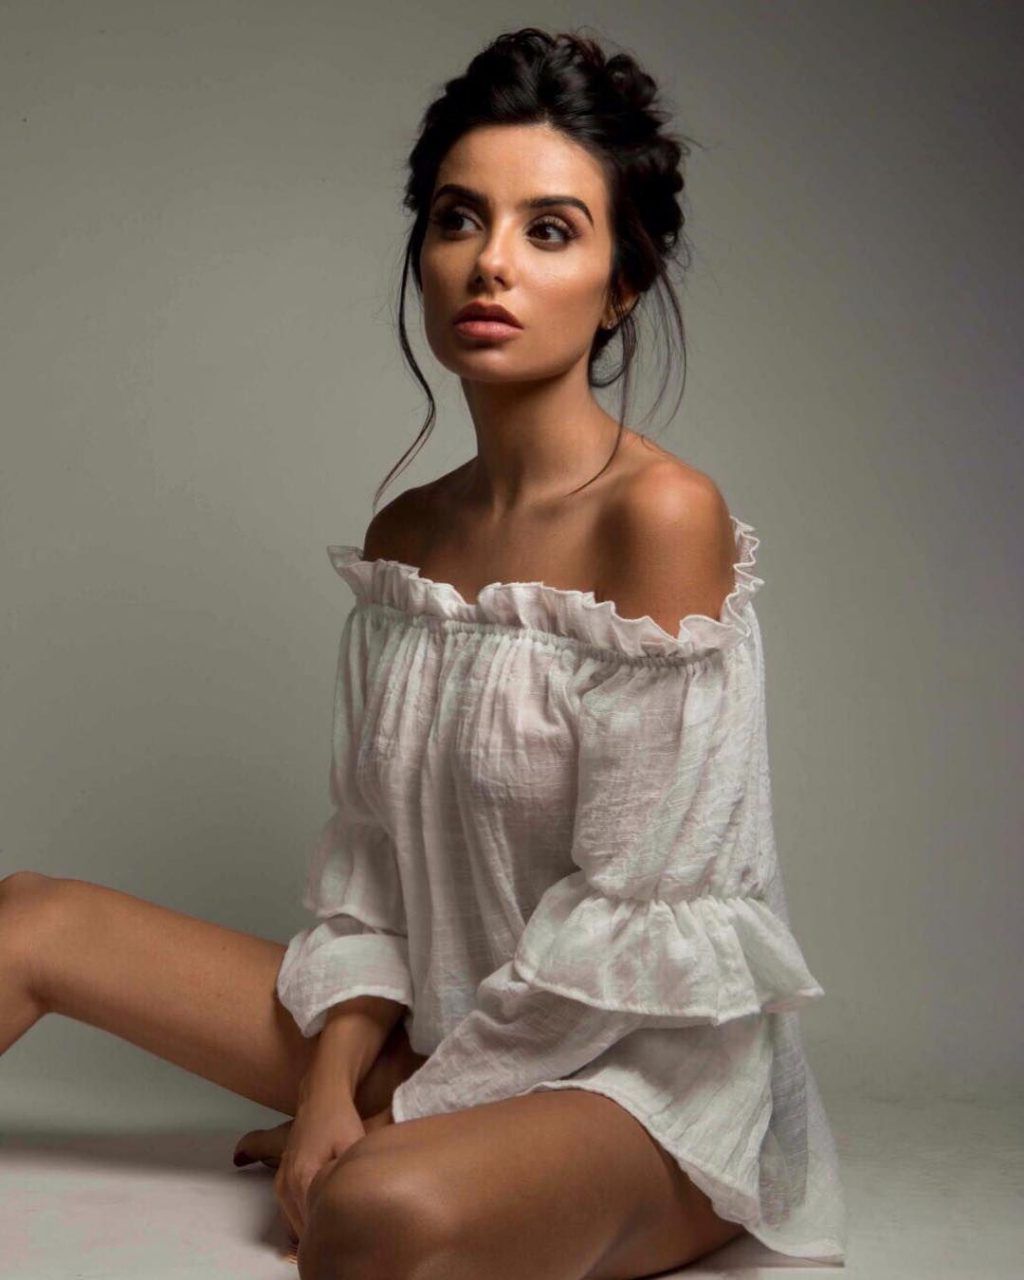 Mikaela hoover thefappening